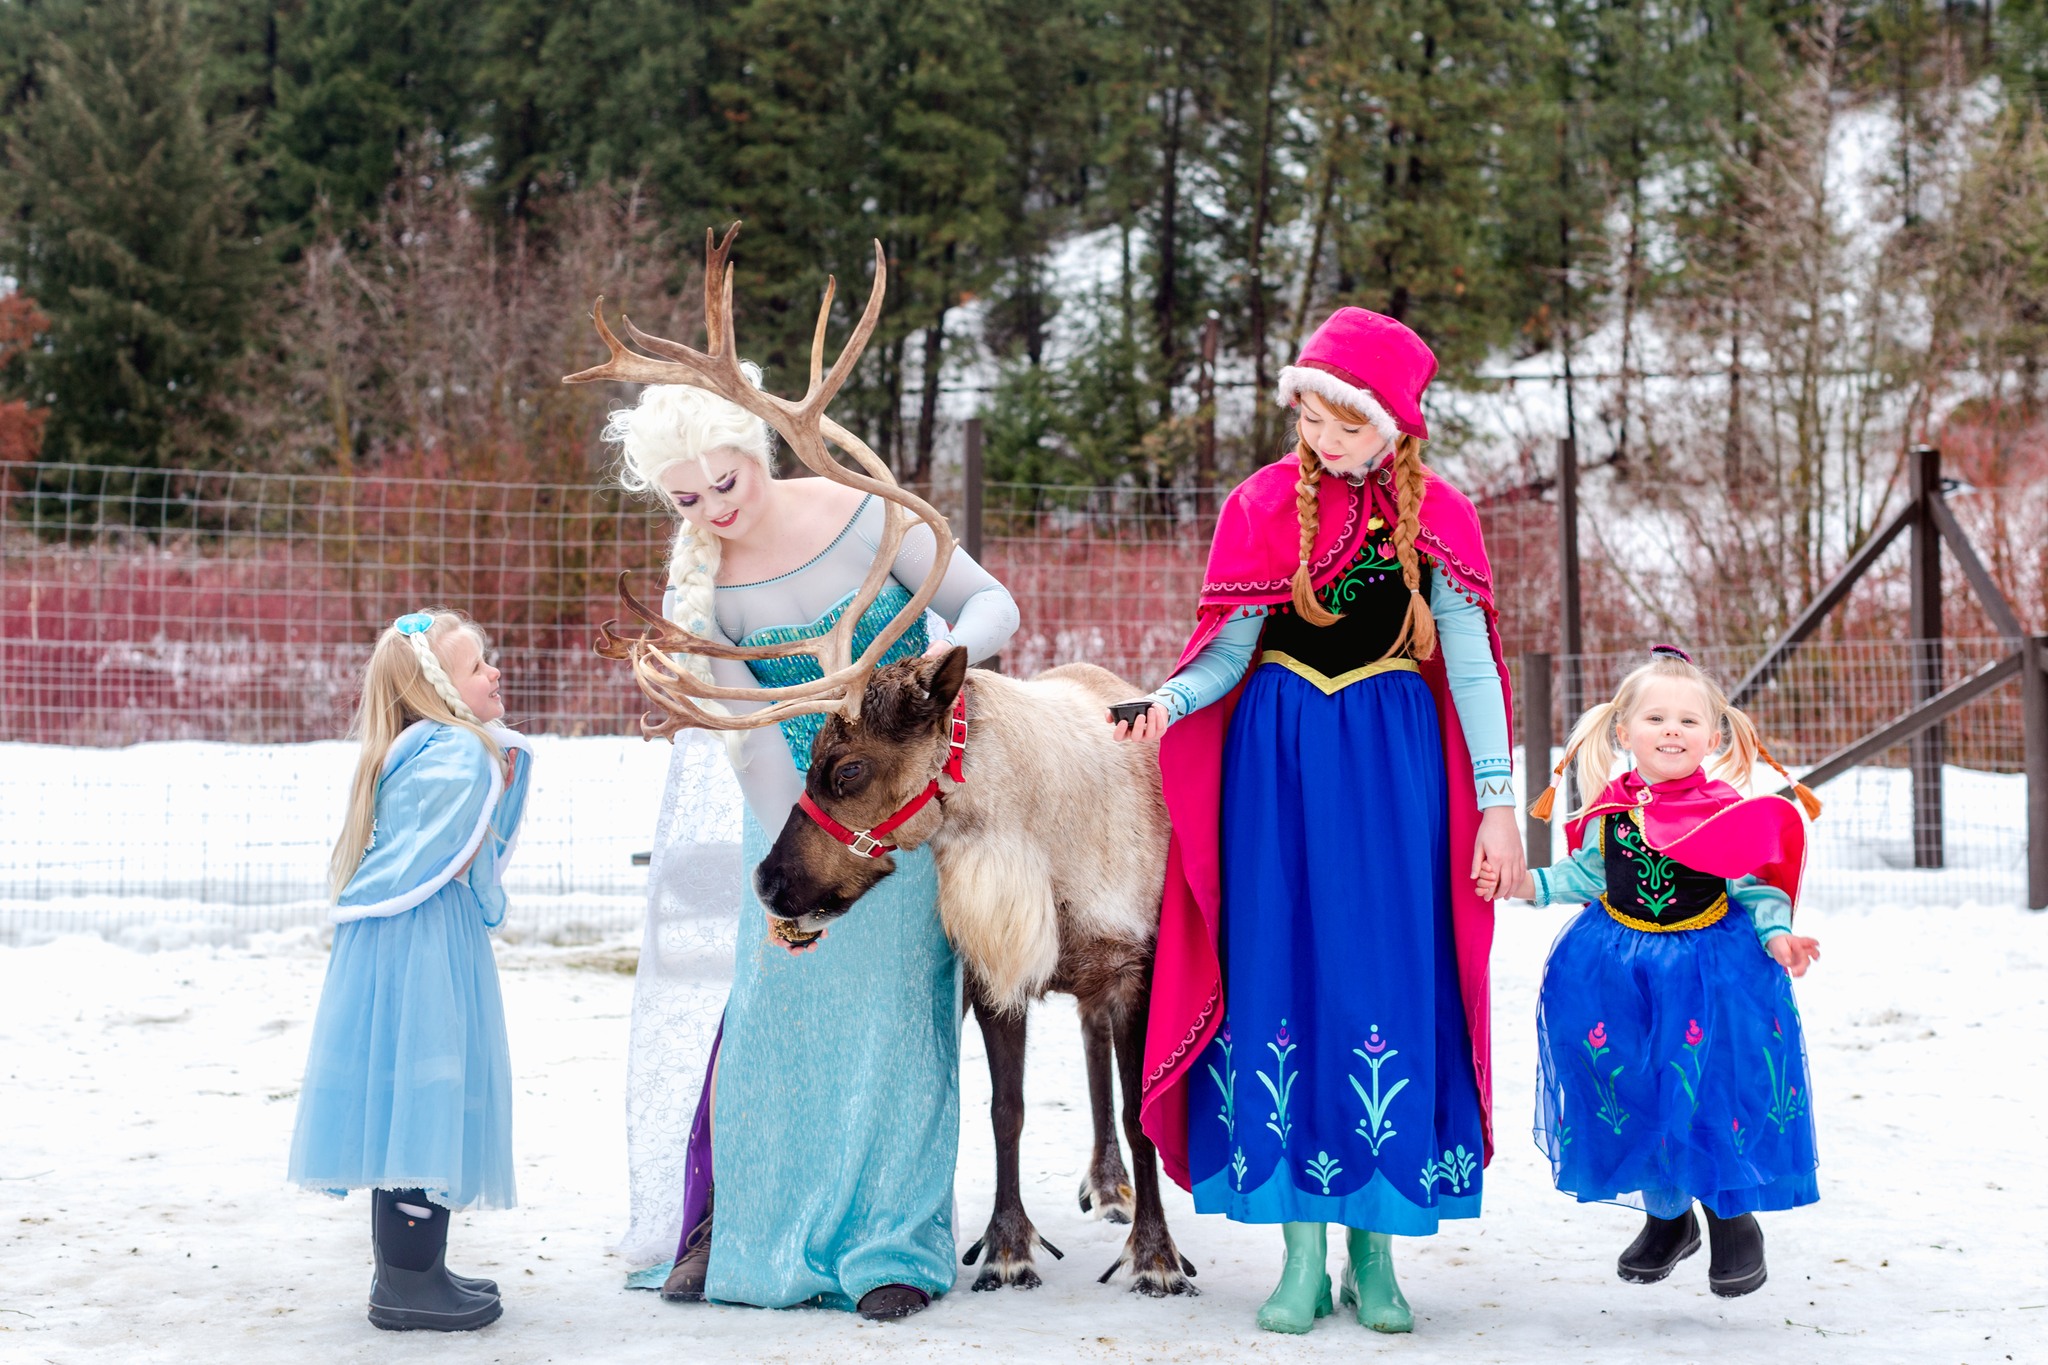 <h1 class="tribe-events-single-event-title">Get Frozen at the Farm! Character Meet & Greet + Reindeer Experience</h1>